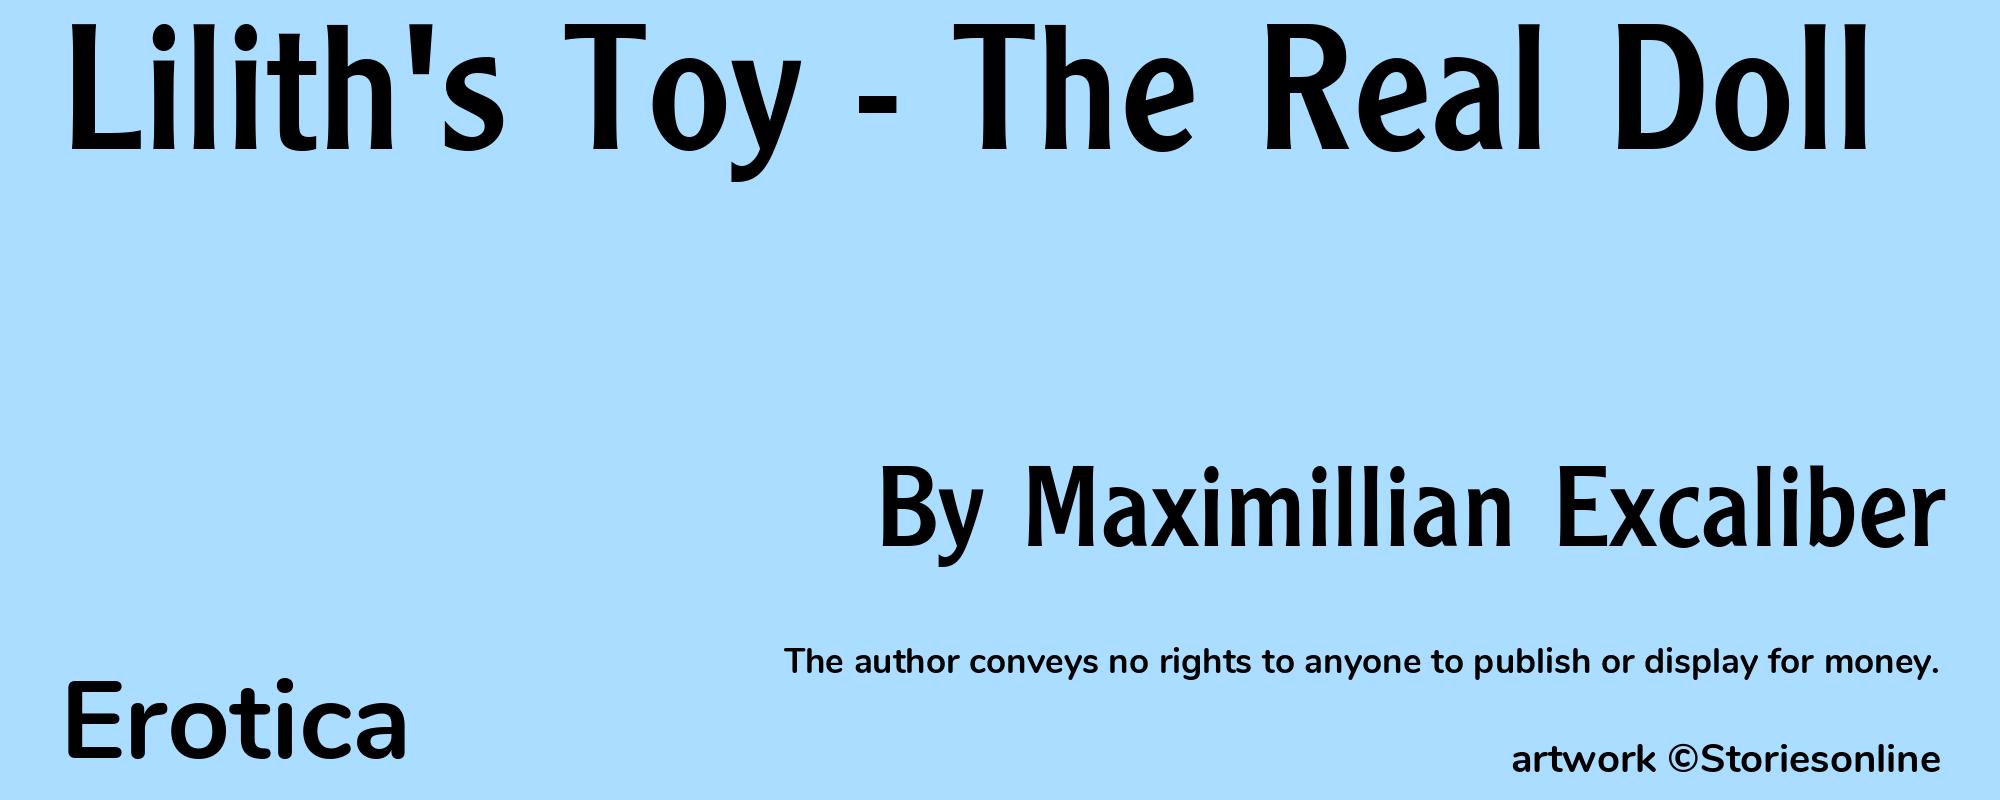 Lilith's Toy - The Real Doll - Cover